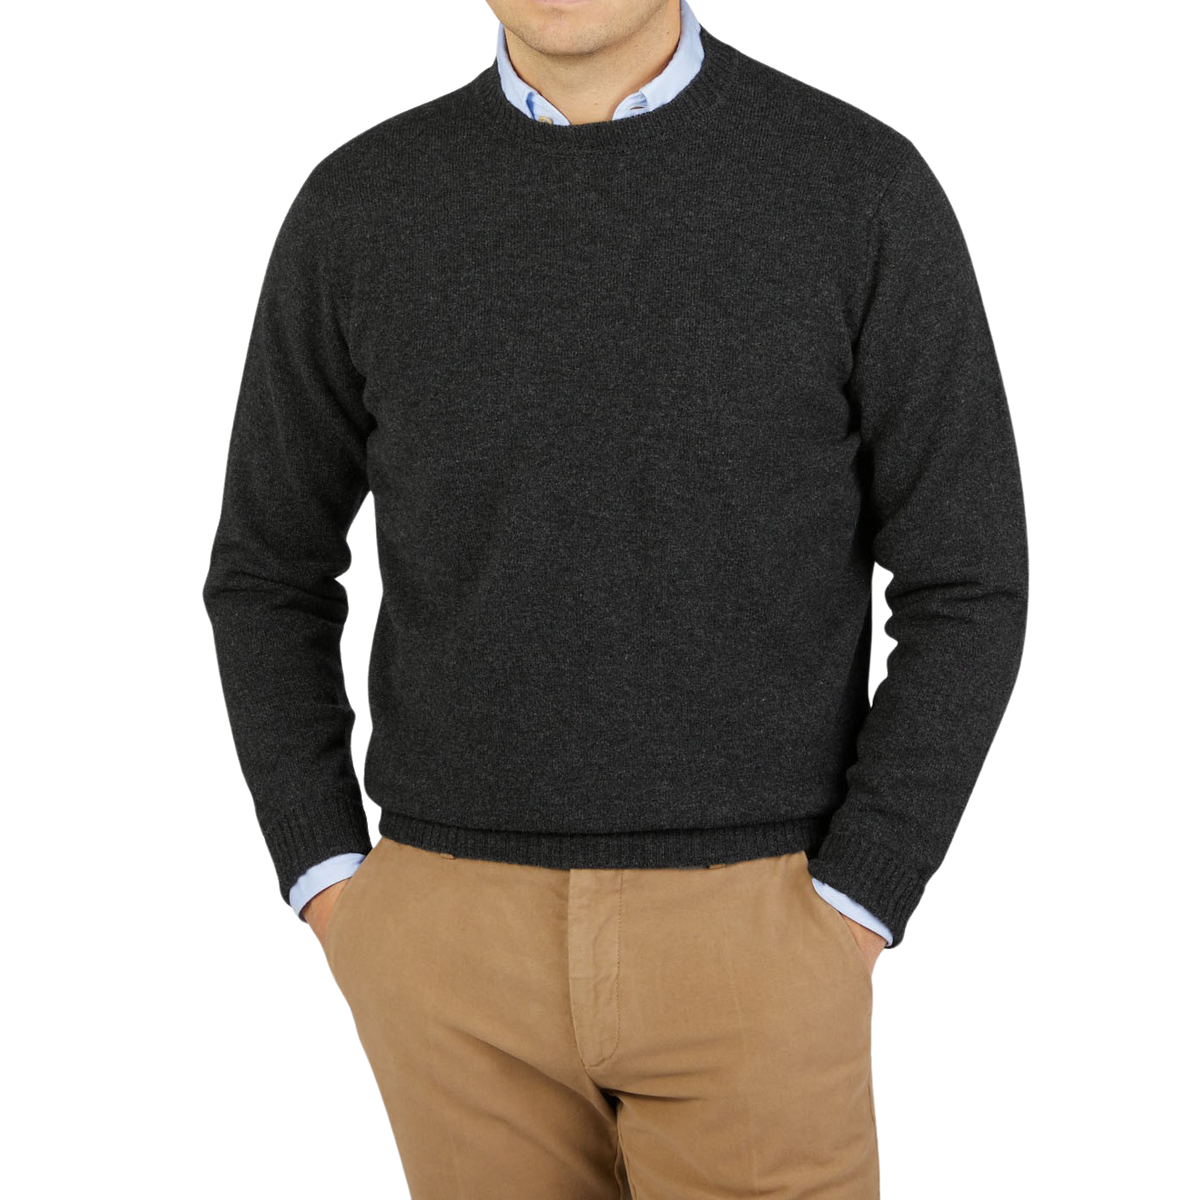 A man wearing a William Lockie Charcoal Grey Crew Neck Lambswool Sweater.